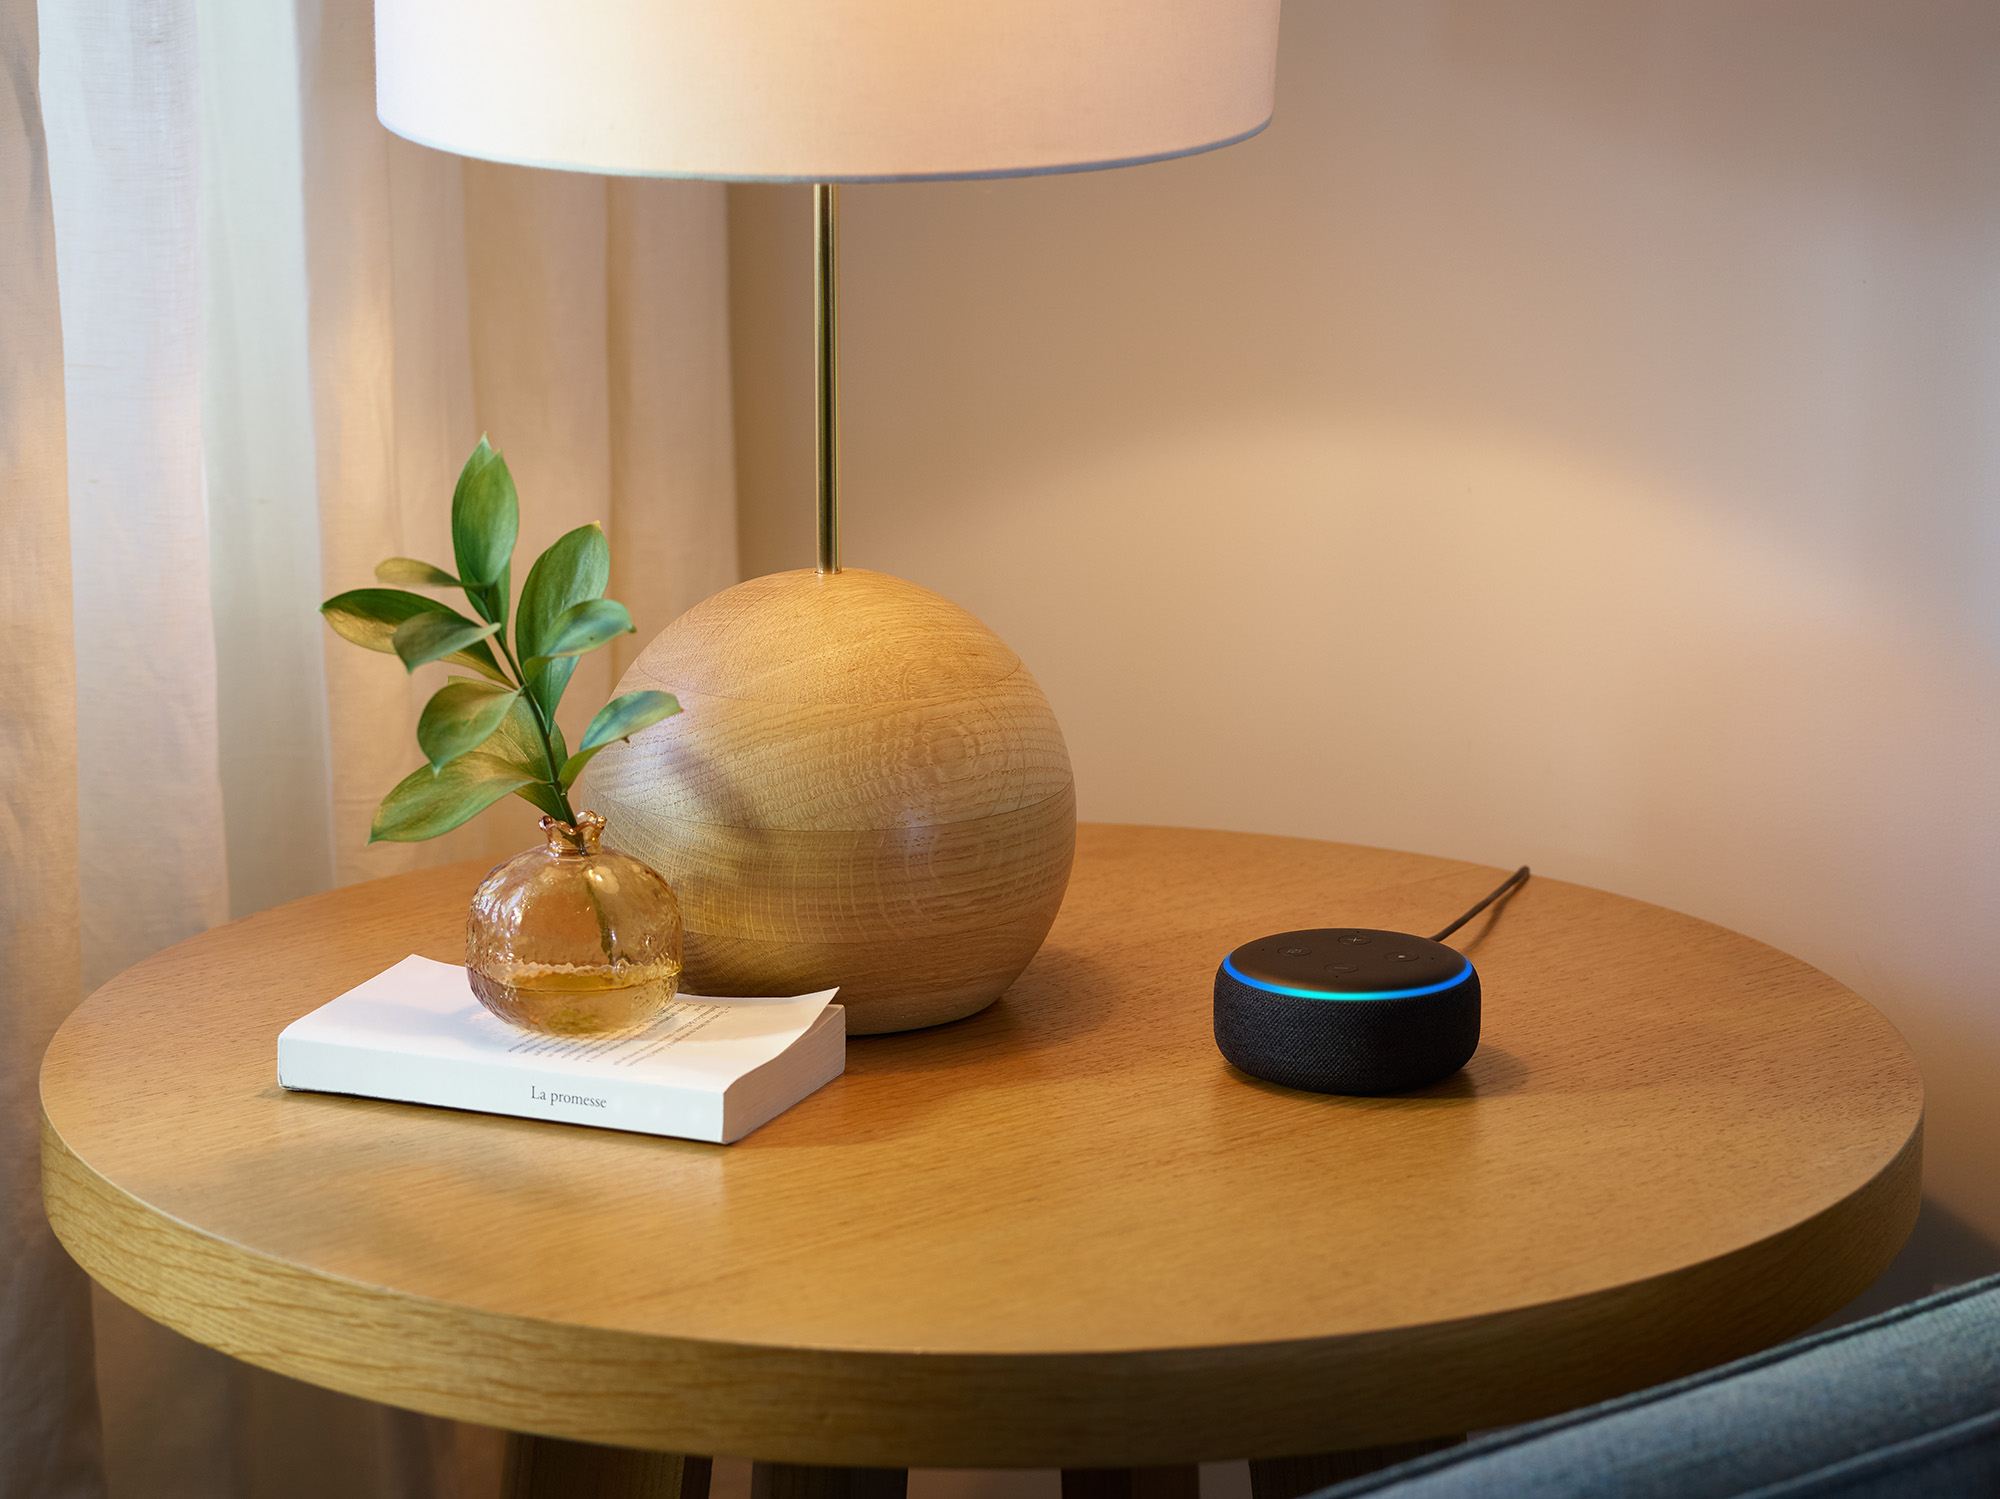 An ‘acoustic fingerprint’ should keep Alexa from waking during Amazon’s Super Bowl ad